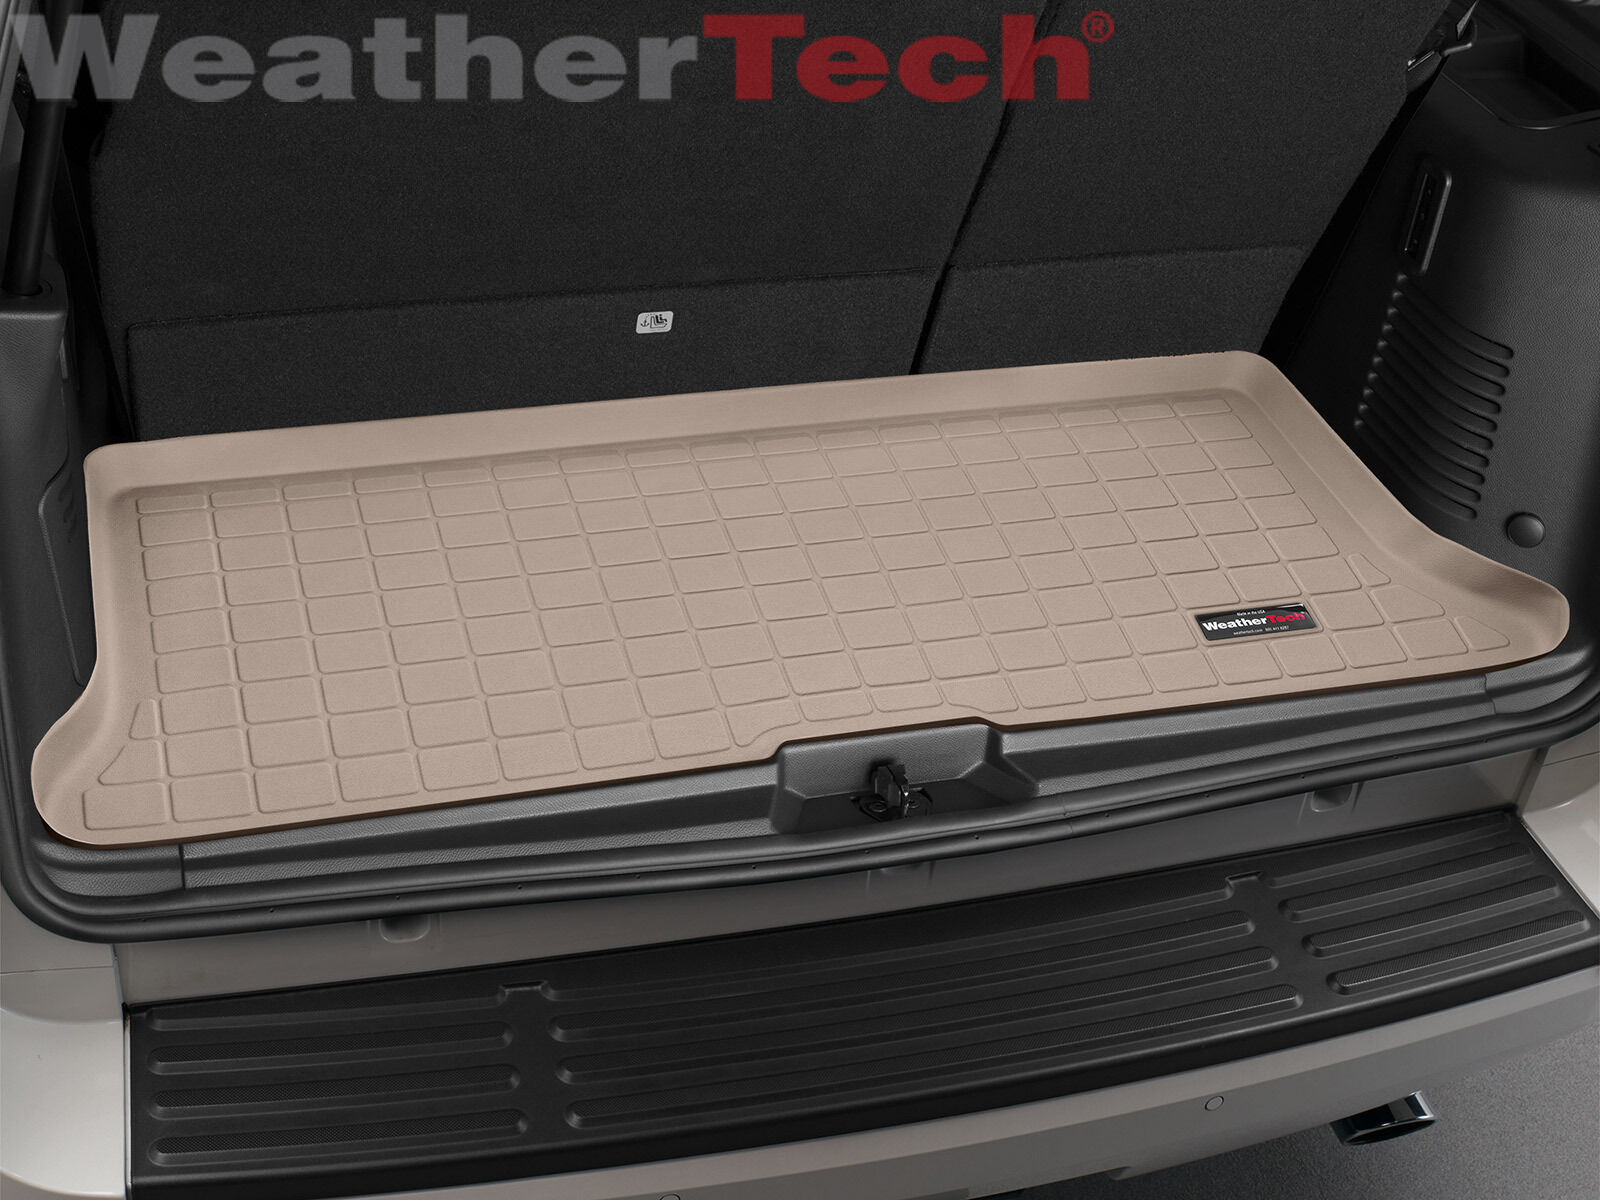 WeatherTech Cargo Liner for Ford Expedition - Small - 2003-2017 - Tan